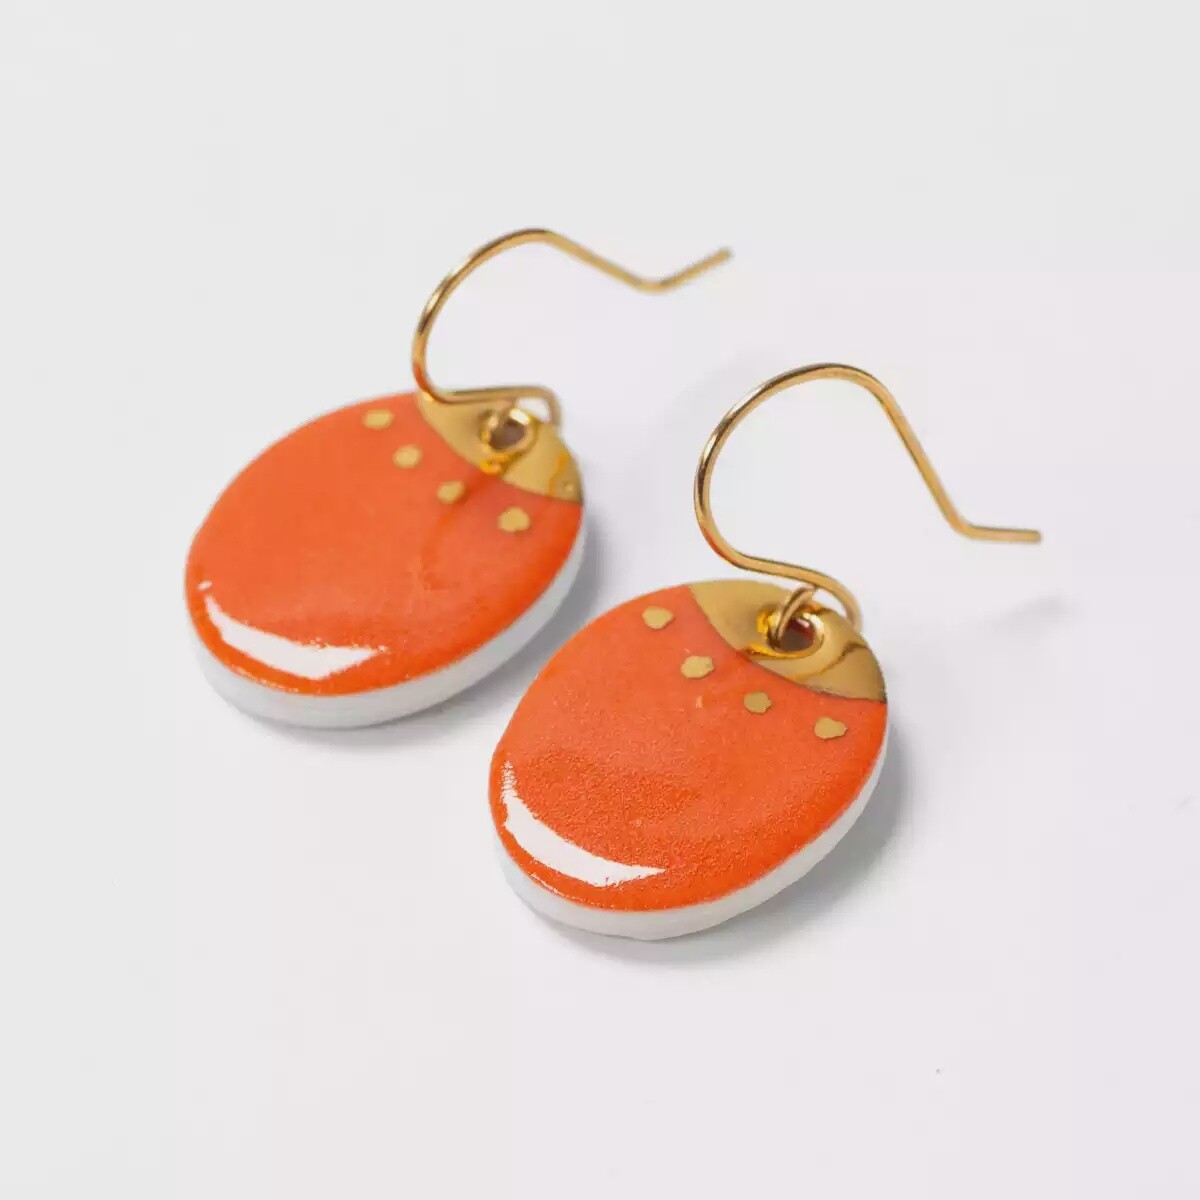 Ceramic Oval Drop Earrings With Gold Lustre Detail - Orange by Clay Blanca